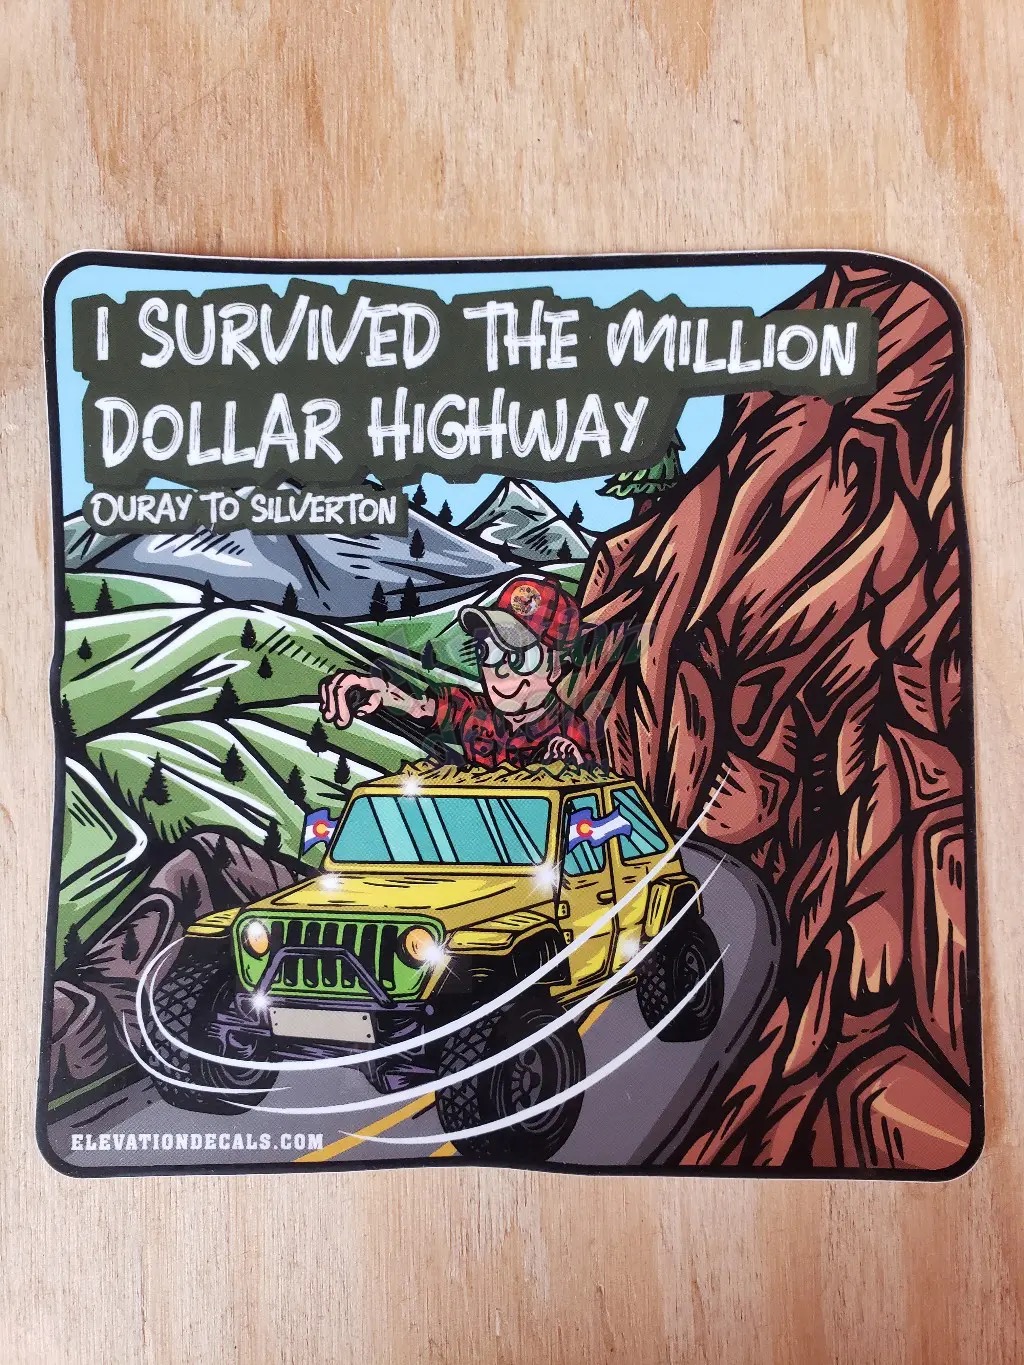 Million Dollar Highway Ouray & Silverton Route 550 Colorado 5x3.5 inch Sticker D 